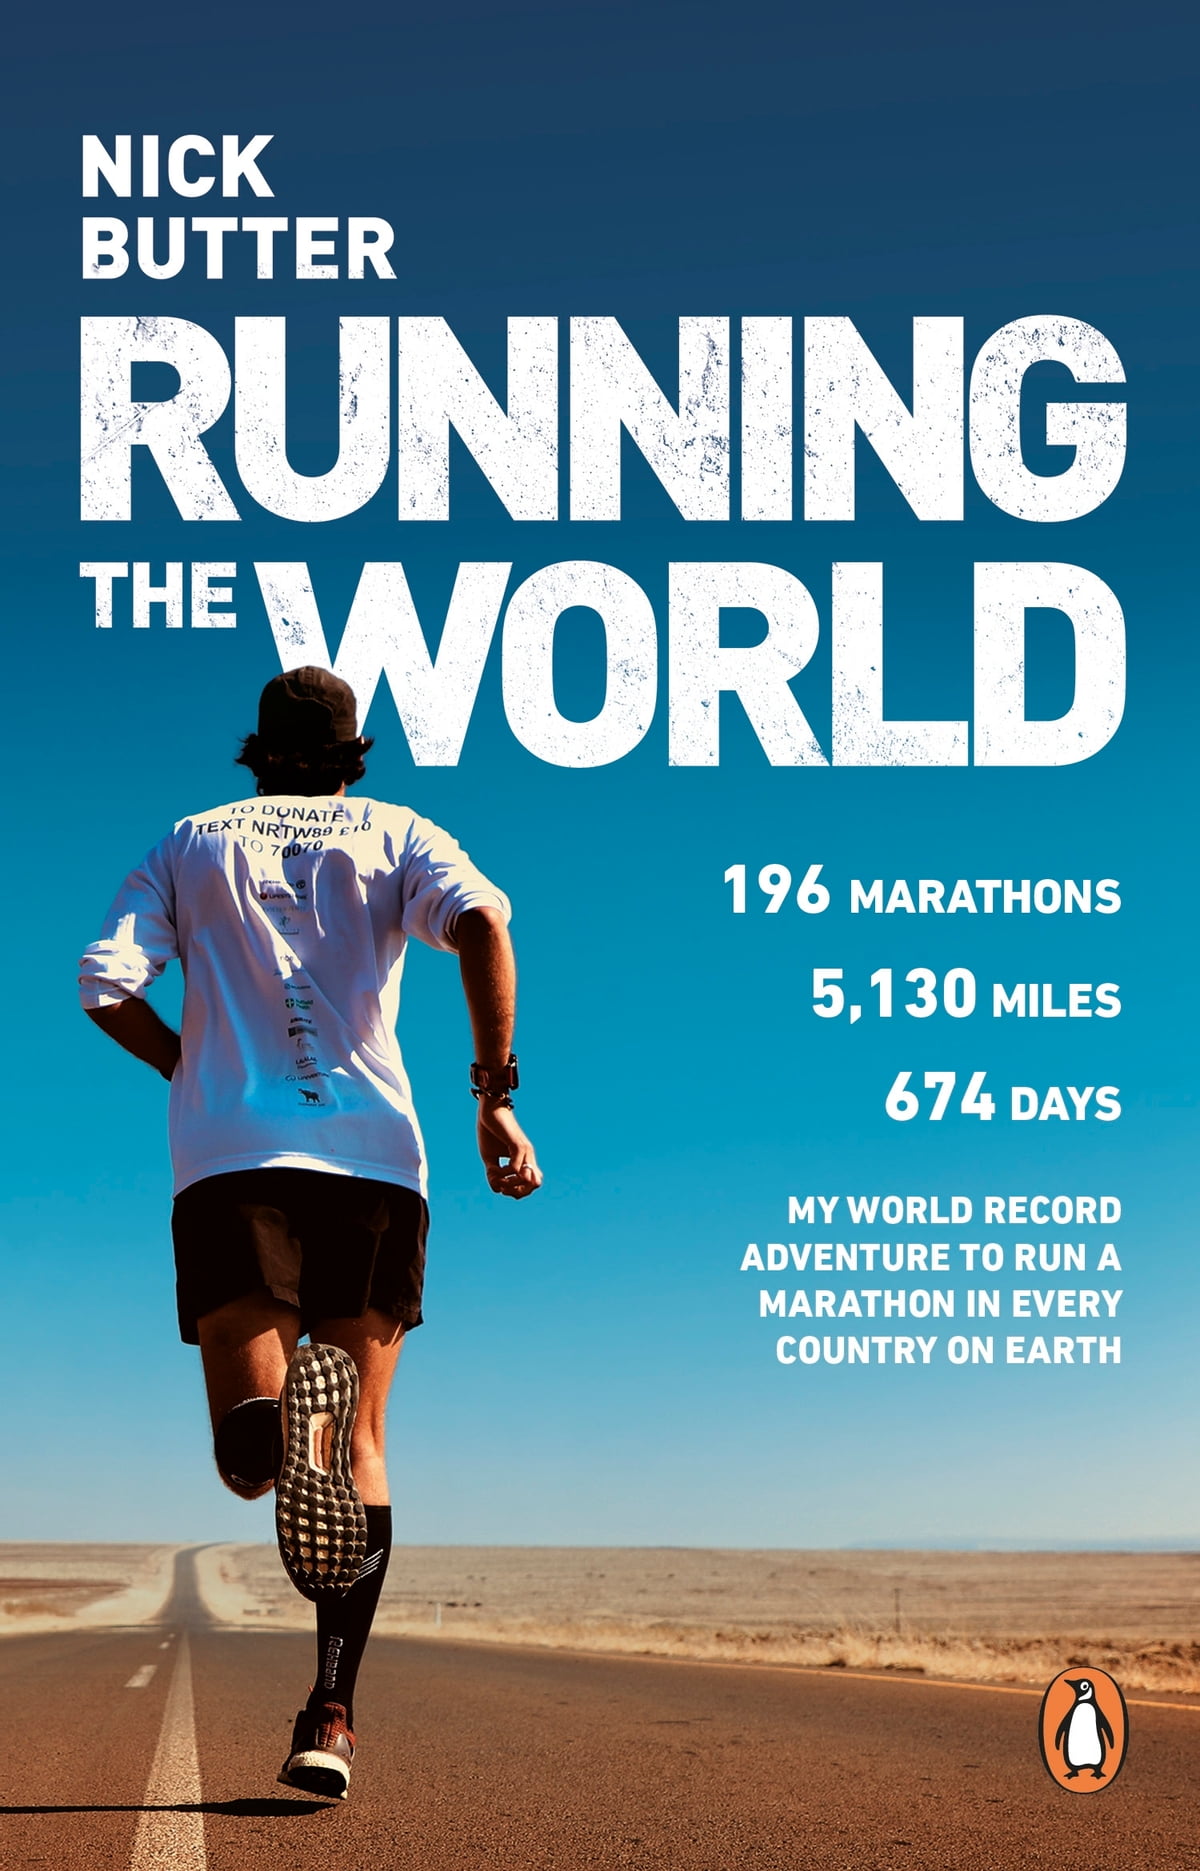 Running the world book cover